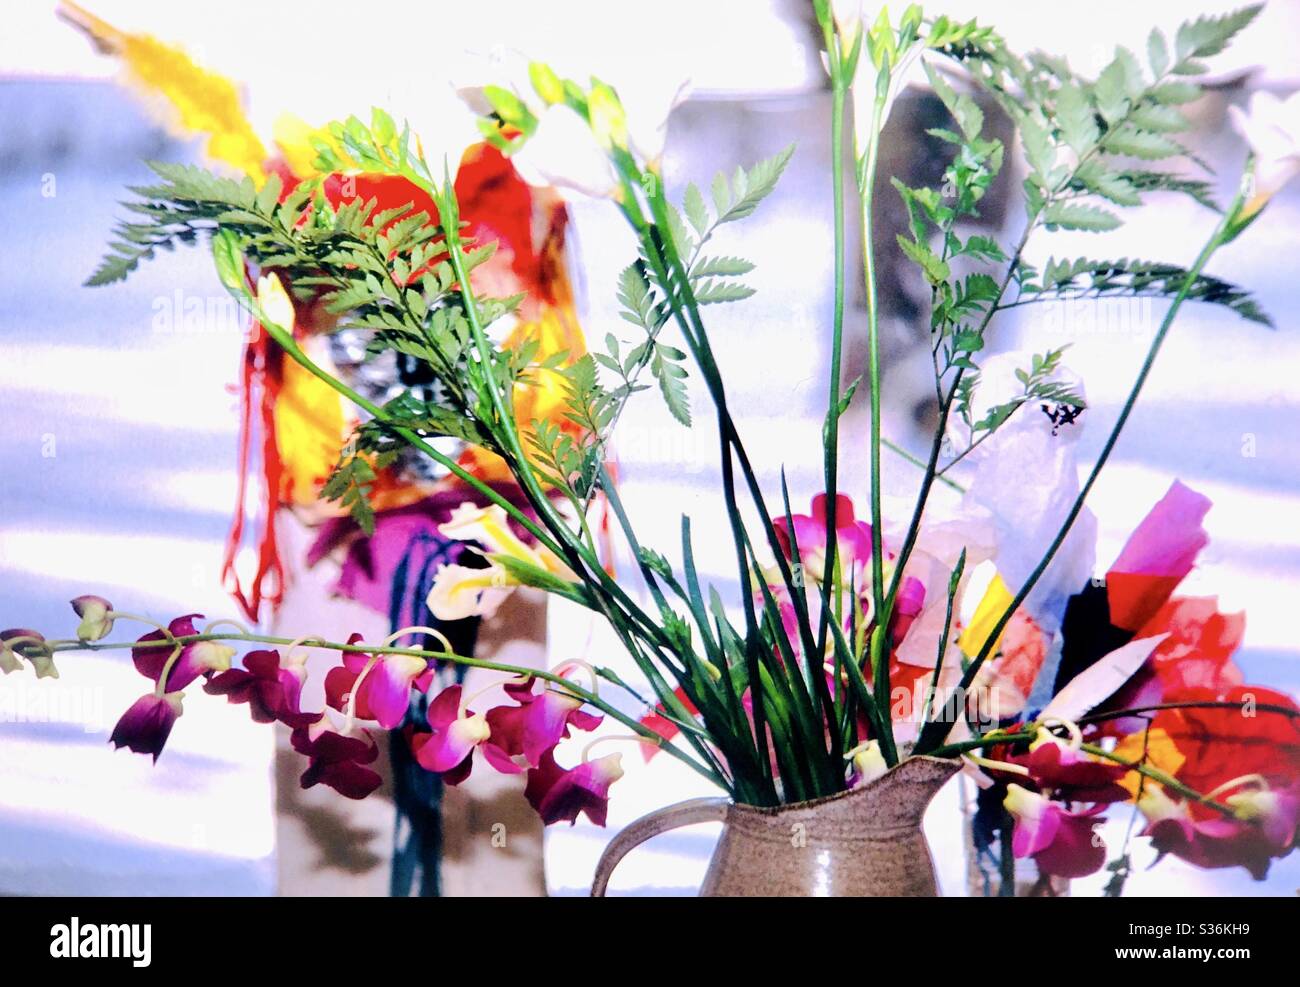 Mixed flowers arrangement on windowsill Vibrant colors casual display Stock Photo